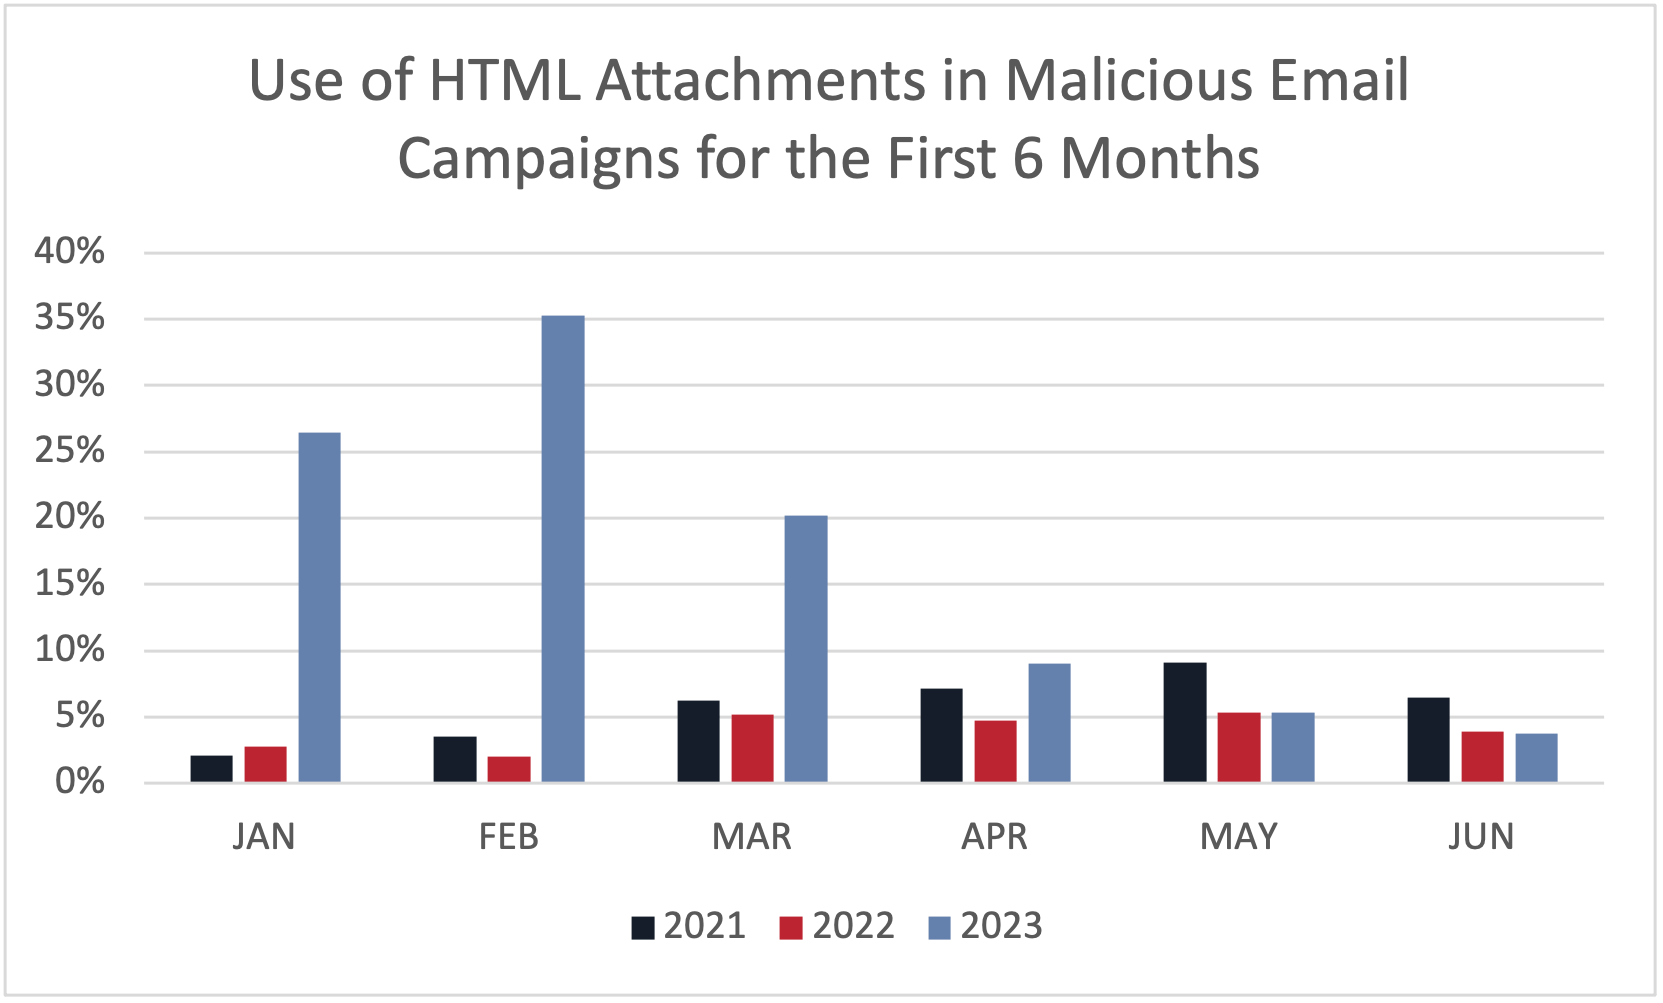 HTML Attachments Used in Malicious Phishing Campaigns Skyrocket: Increase 168% from 2022 and 450% from 2021